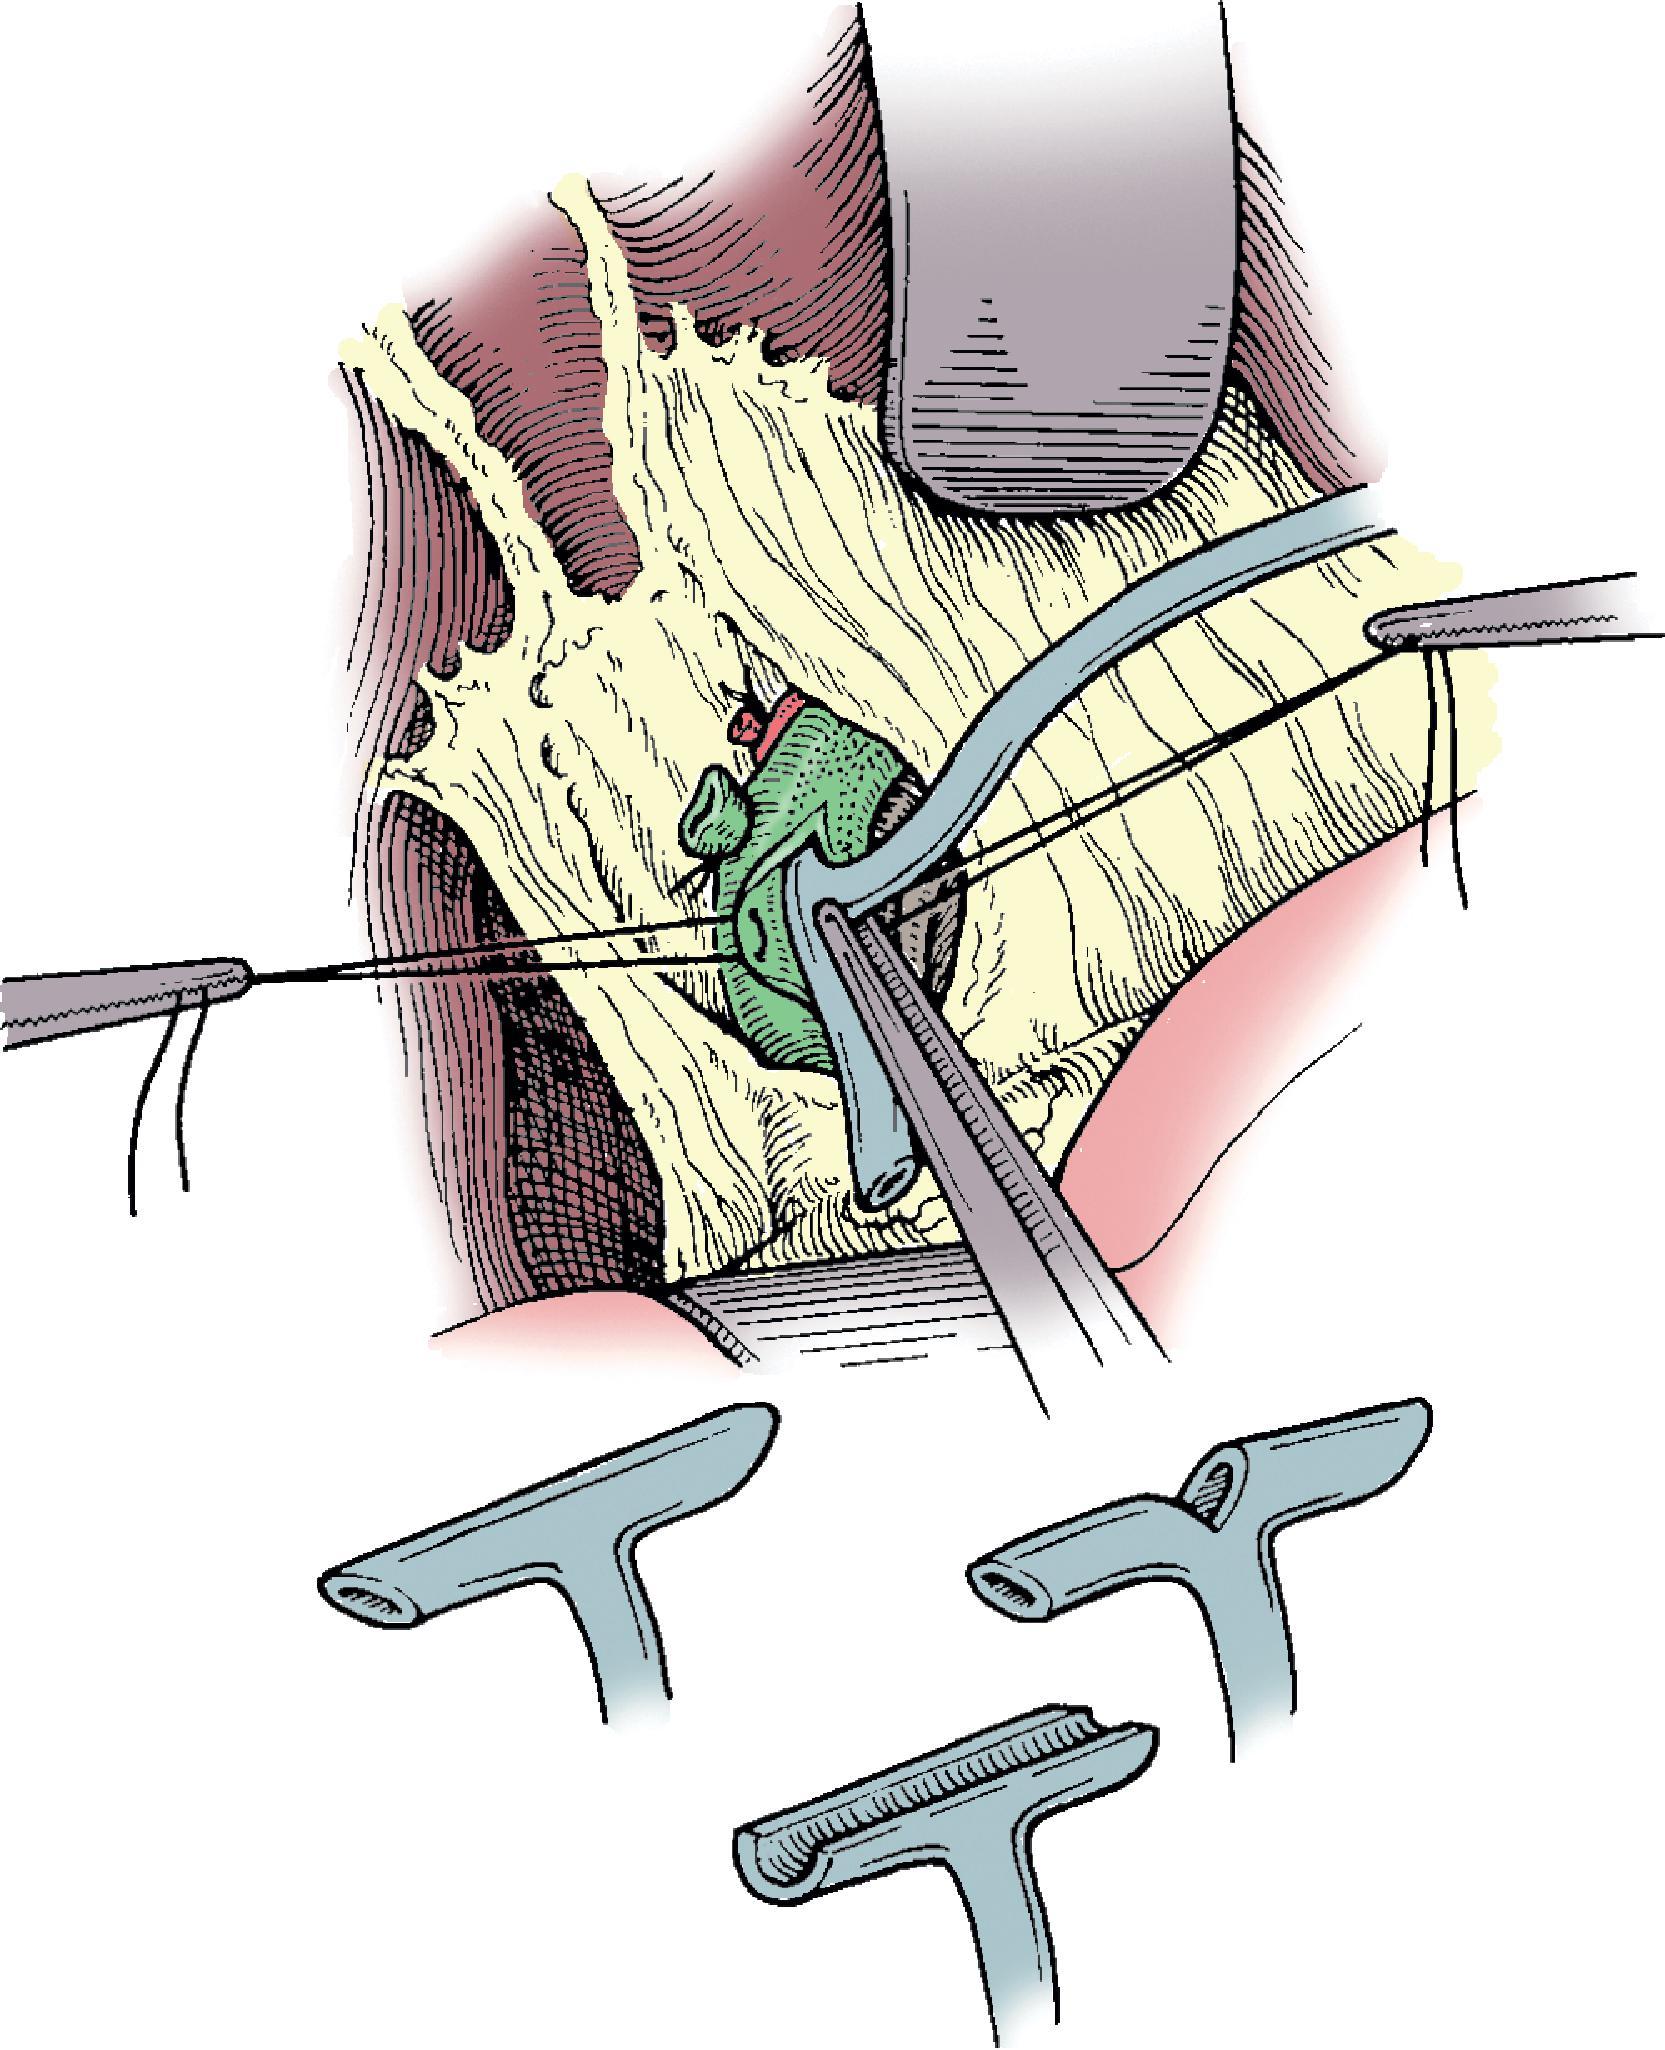 FIG. 5, Closure of the ductotomy over a T-tube. When trimming the T-tube, it is common to excise part or all of the back wall to facilitate extraction. The ductotomy should be closed as described in the text.